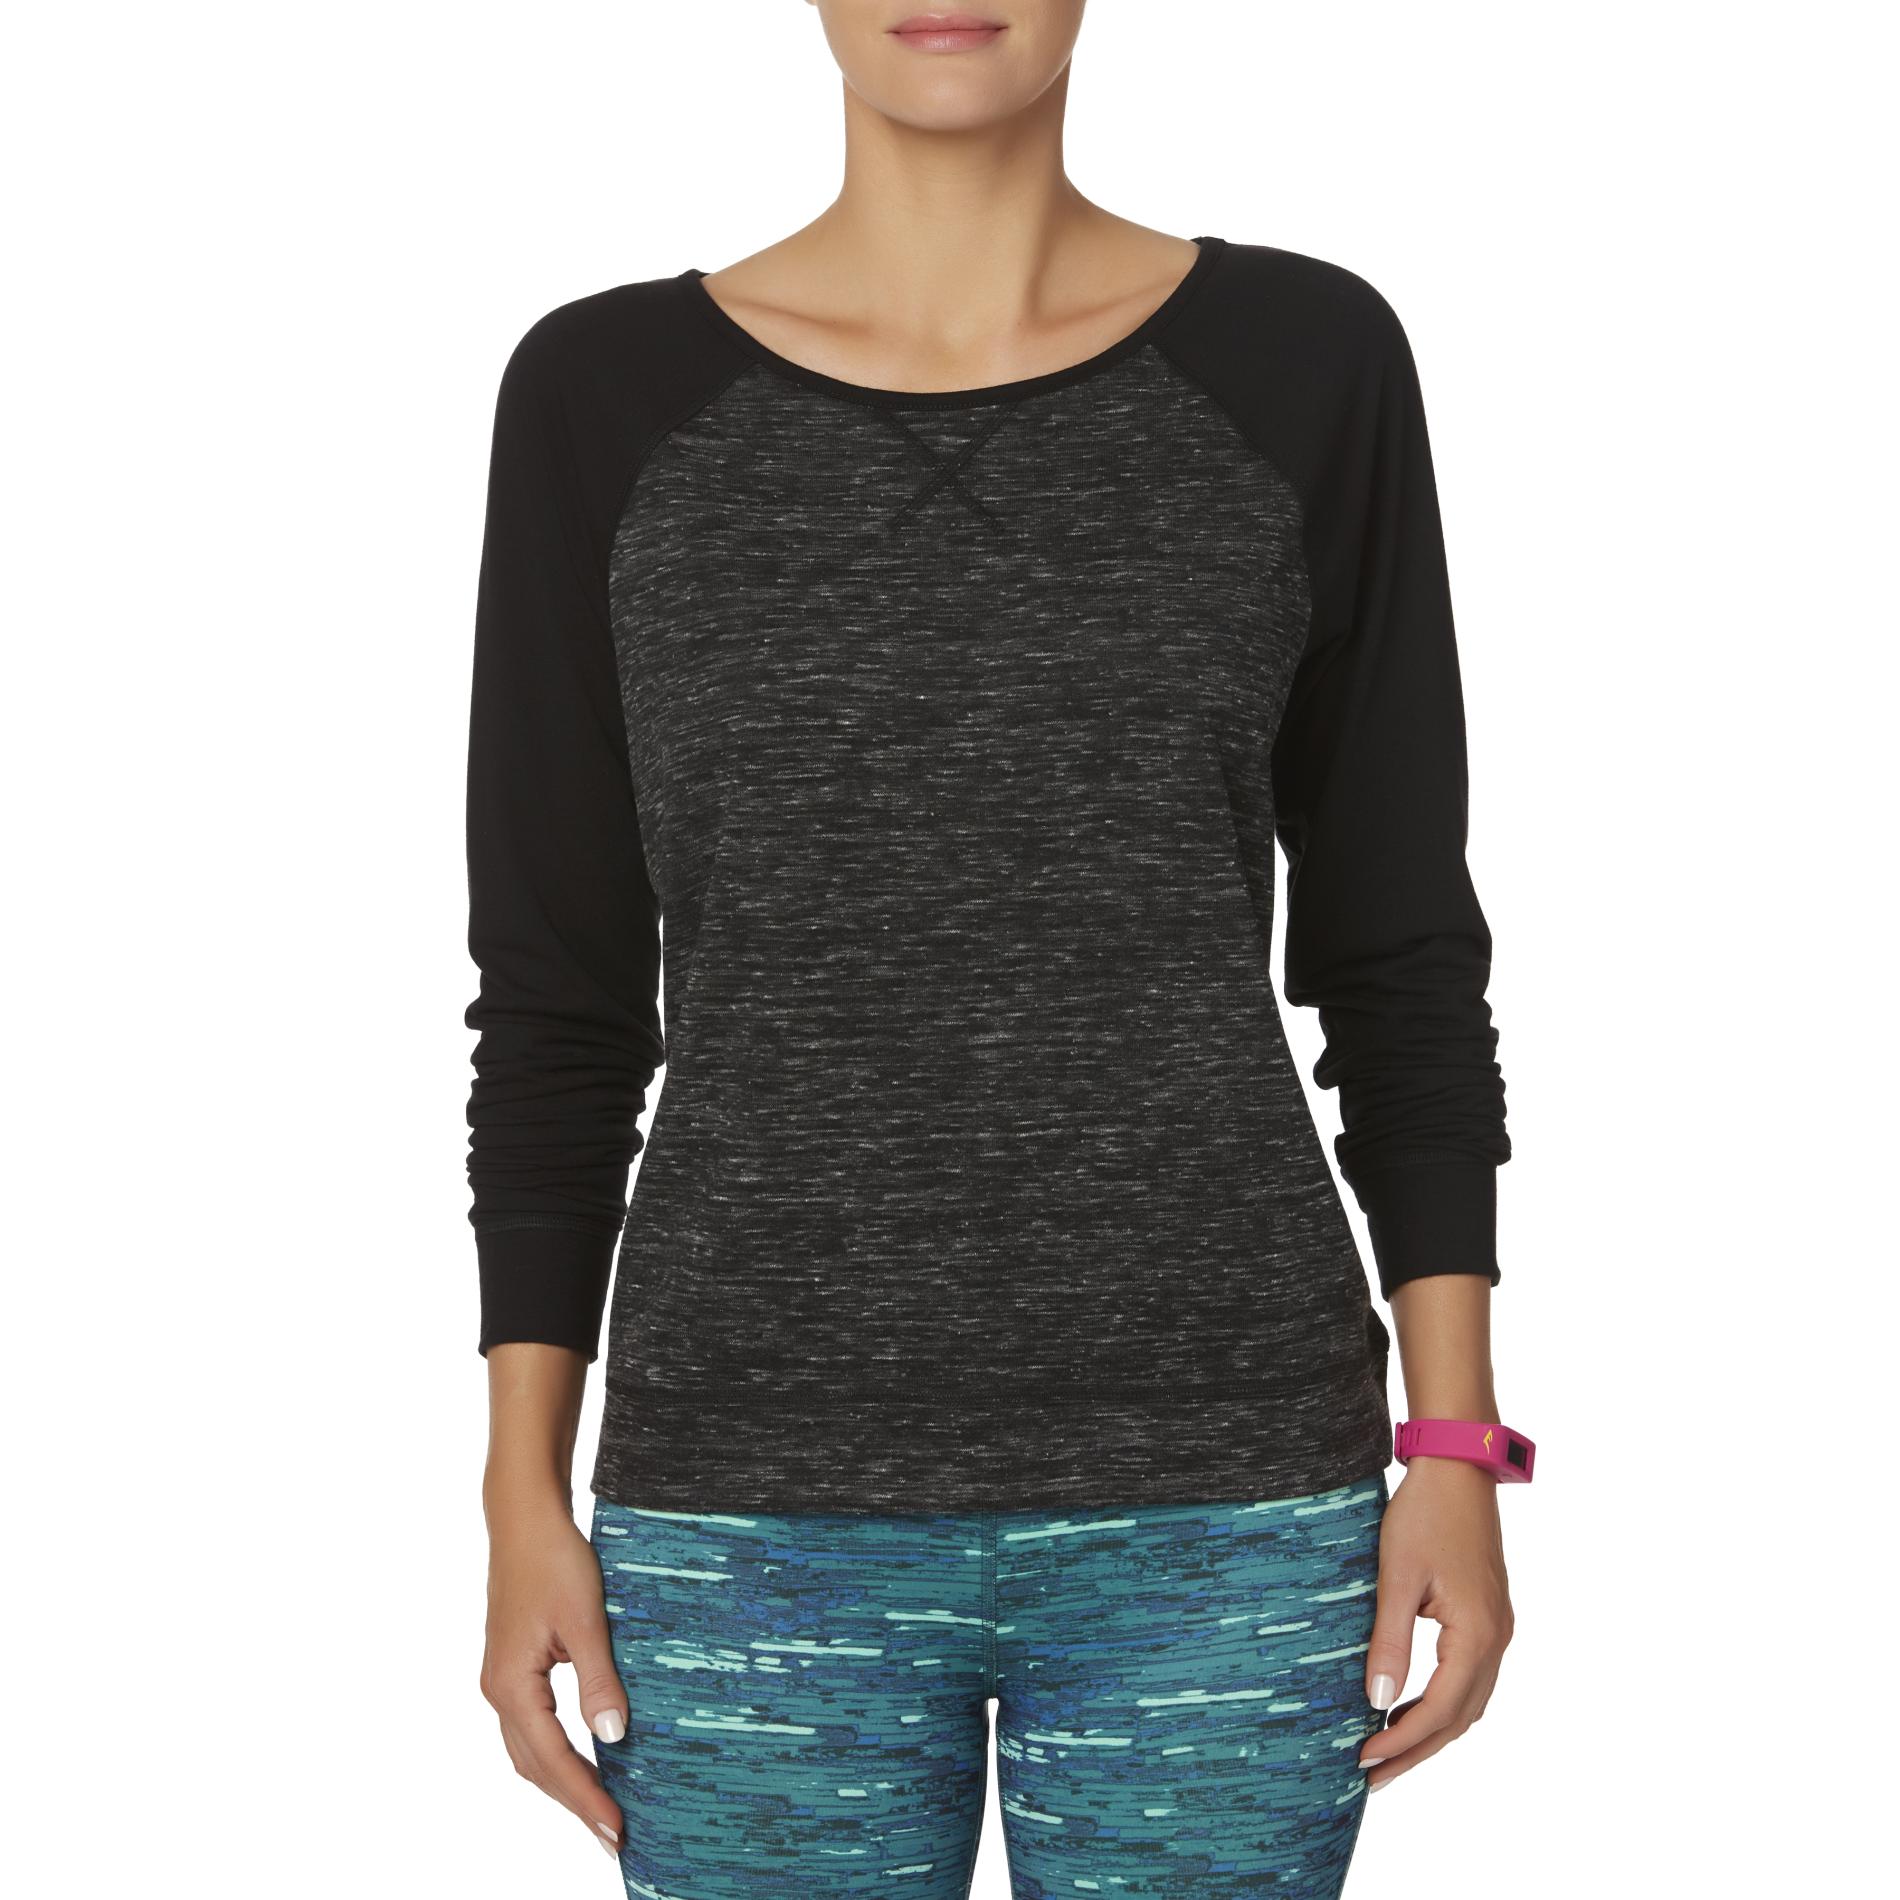 Everlast&reg; Women's French Terry Knit Top - Space Dyed